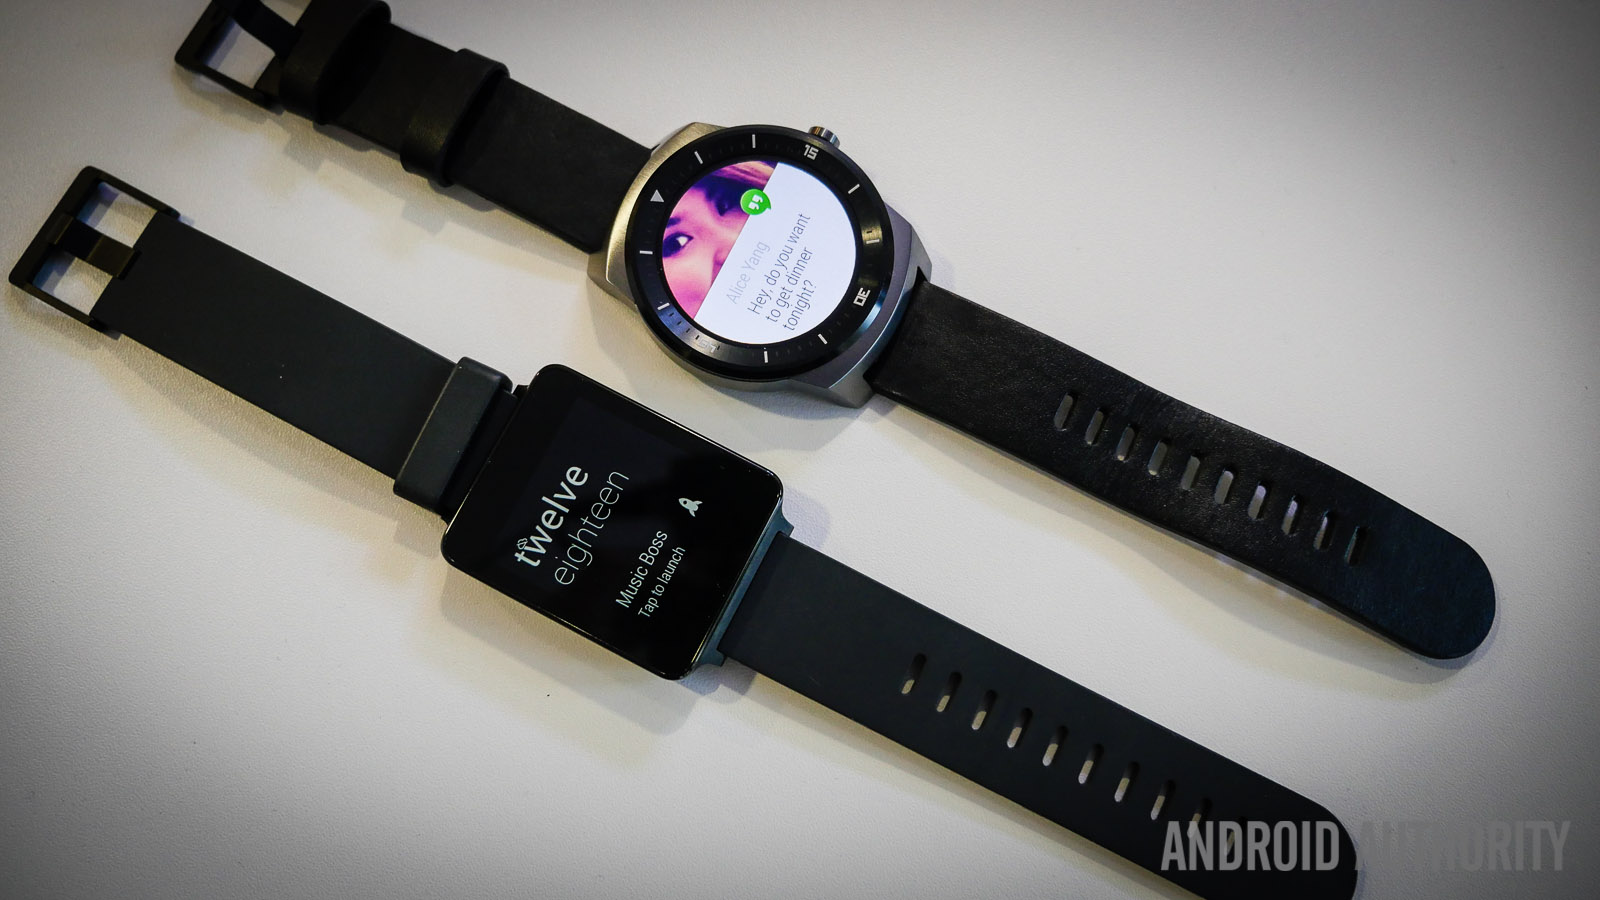 LG G Watch and G Watch R represent some of the competition HTC will face.